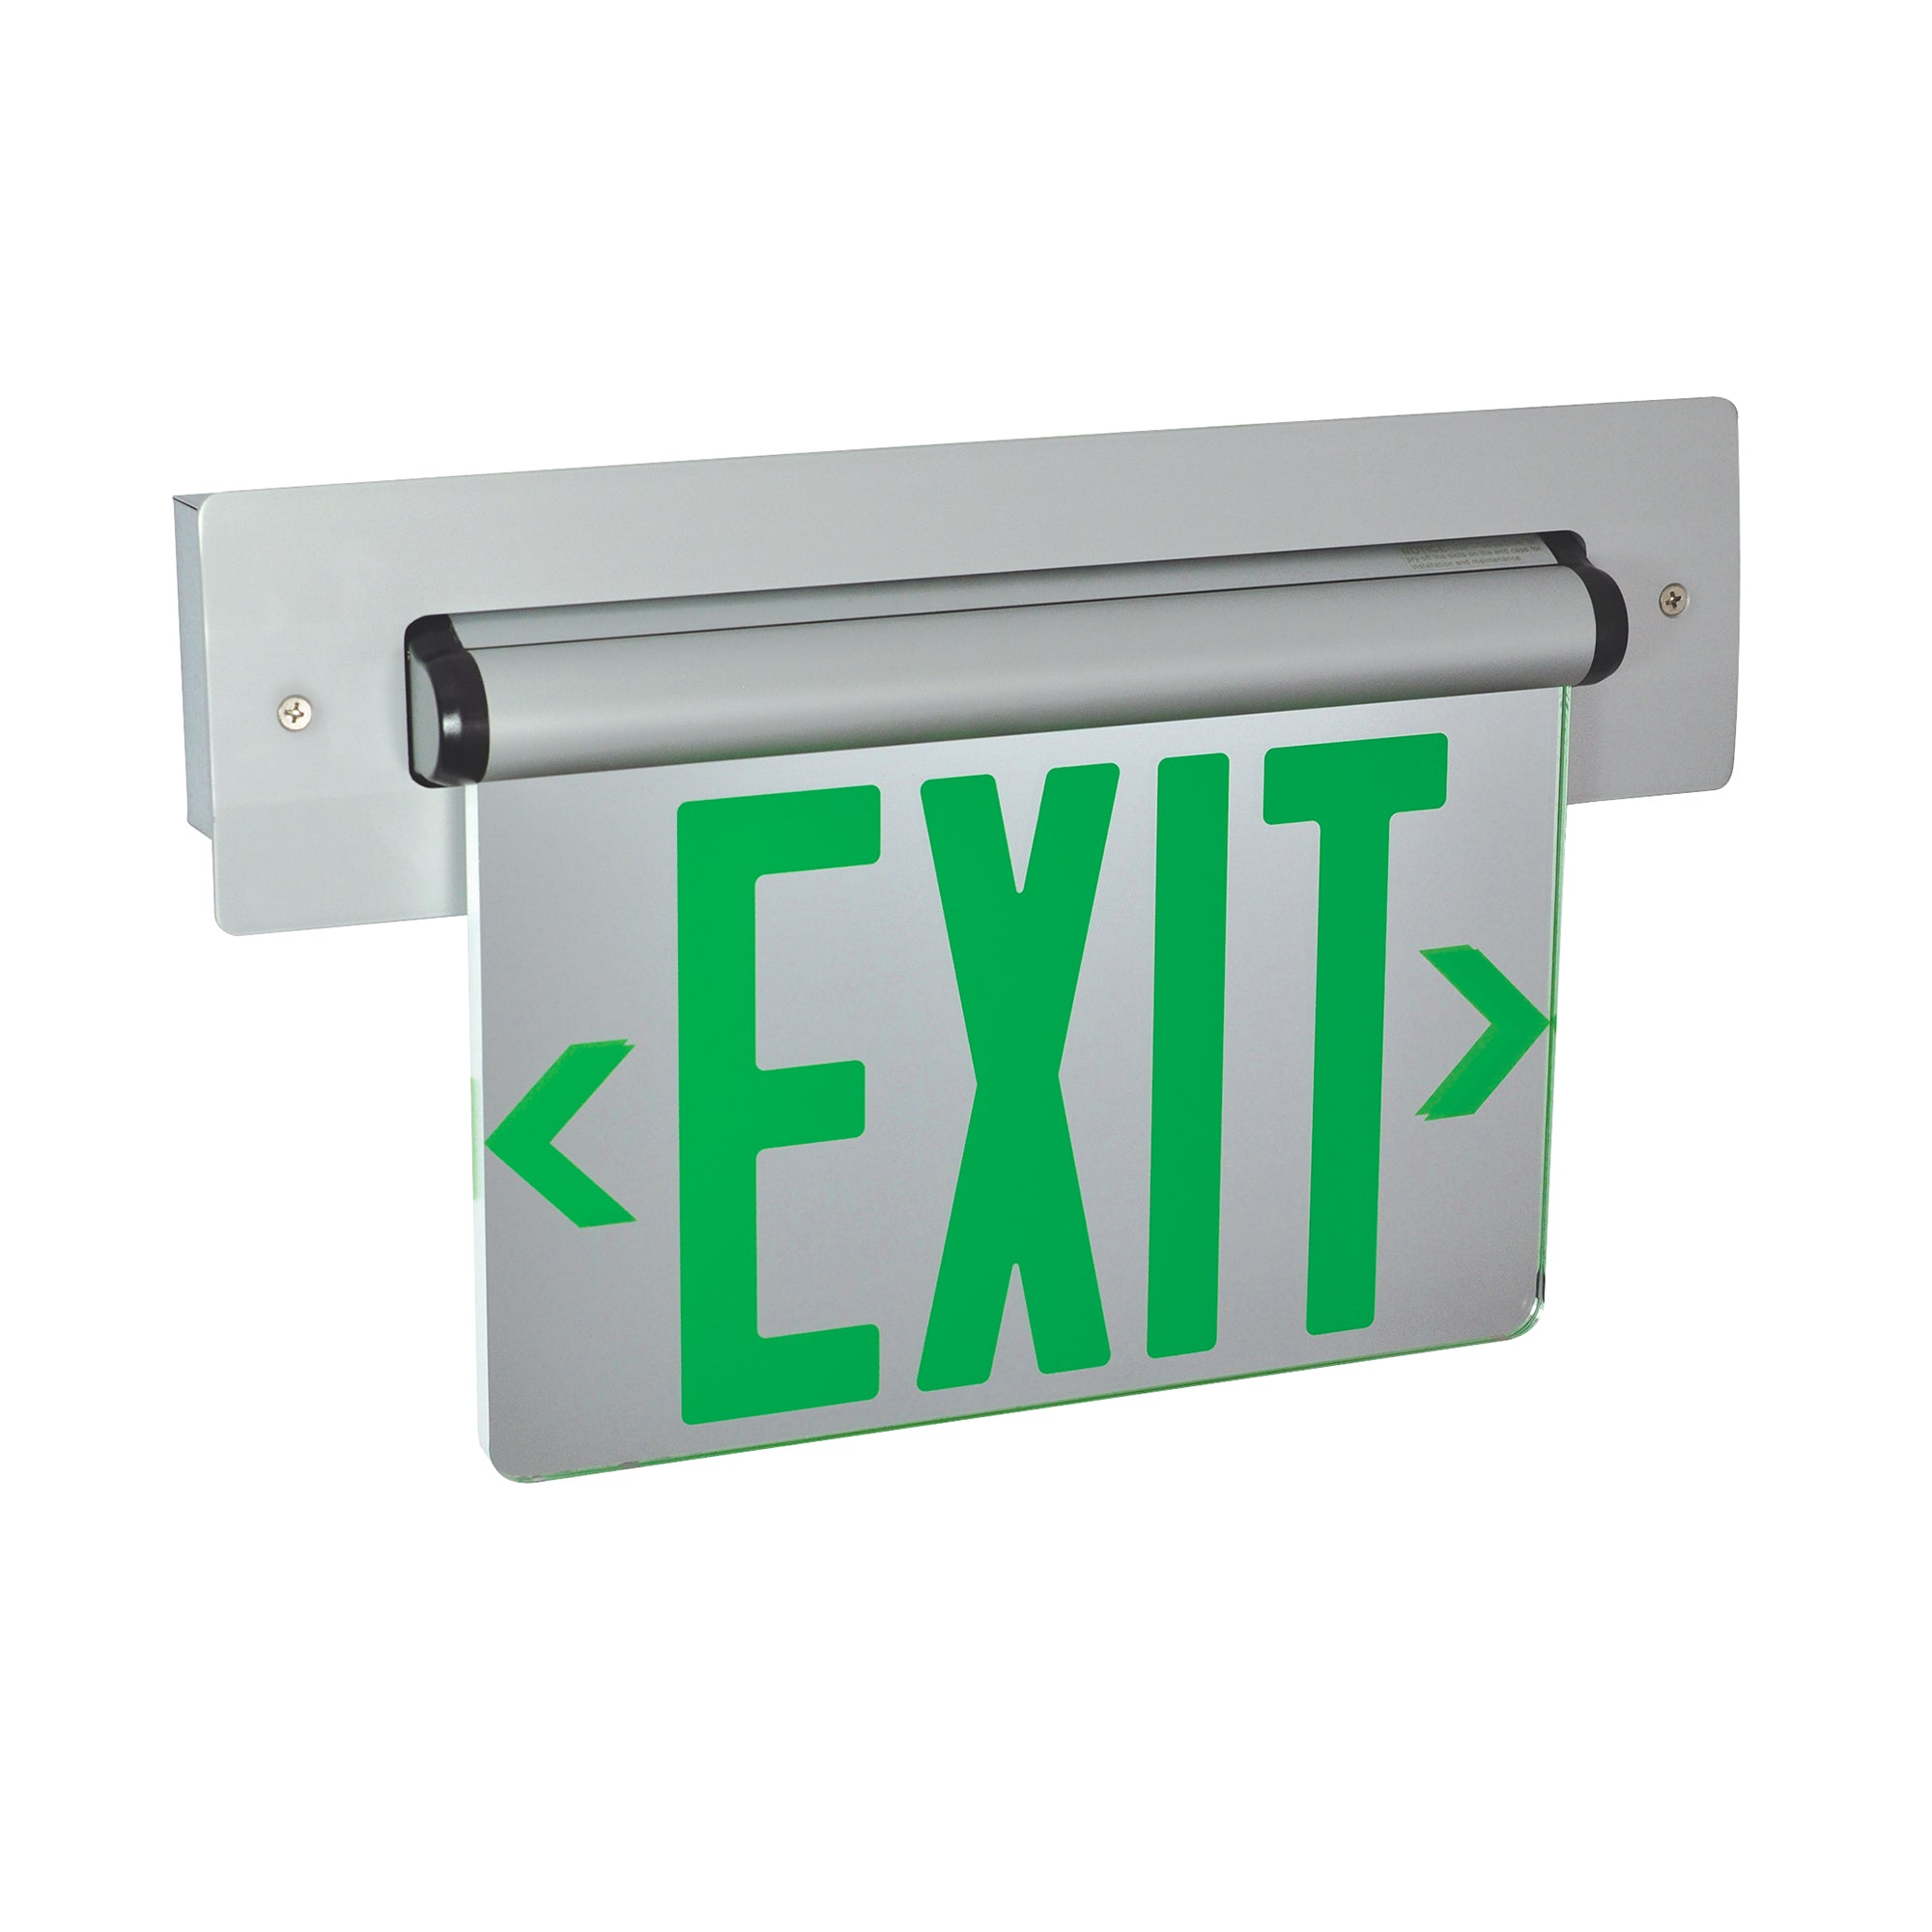 Nora Lighting NX-813-LEDGMW - Exit / Emergency - Recessed Adjustable LED Edge-Lit Exit Sign, AC Only, 6 Inch Green Letters, Single Face / Mirrored Acrylic, White Housing